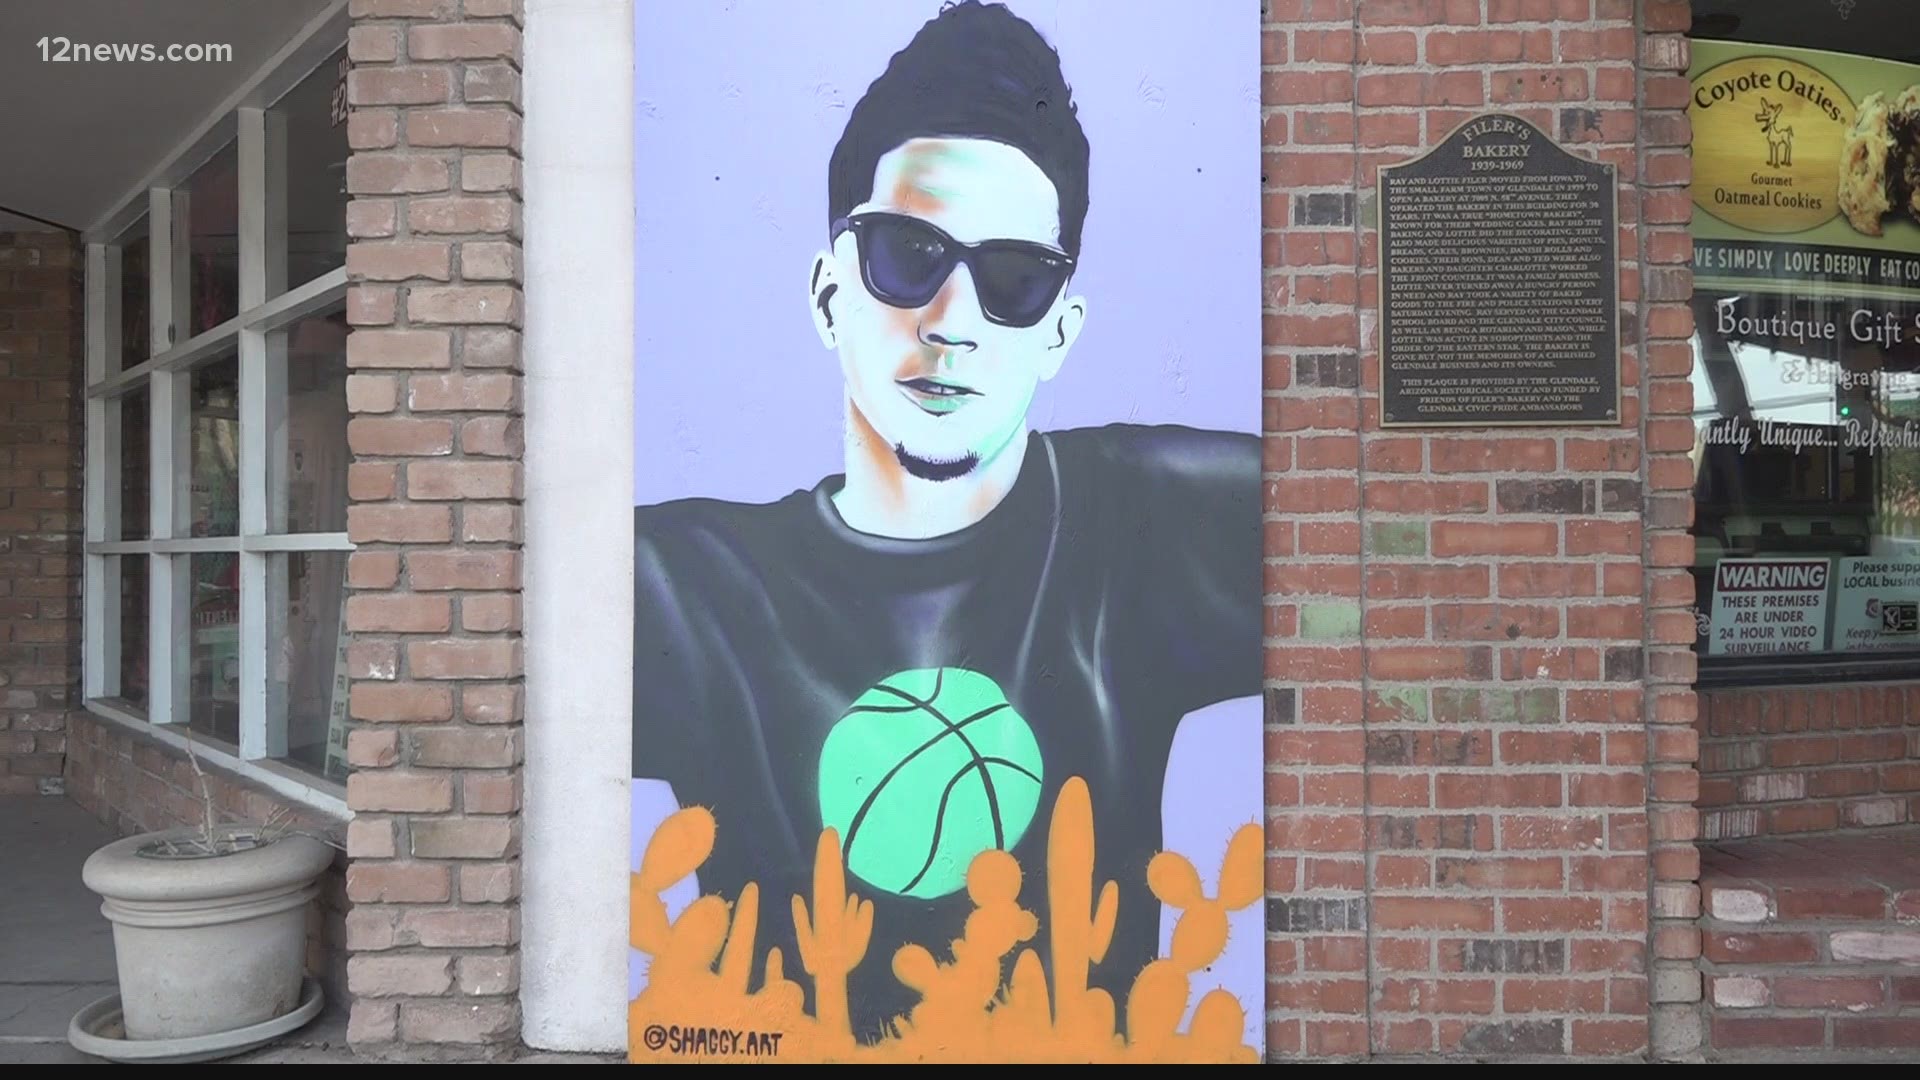 The Suns loss to the Bucks on Wednesday was disappointing, but Suns excitement is still growing. A new mural in Glendale features Suns star Devin Booker.